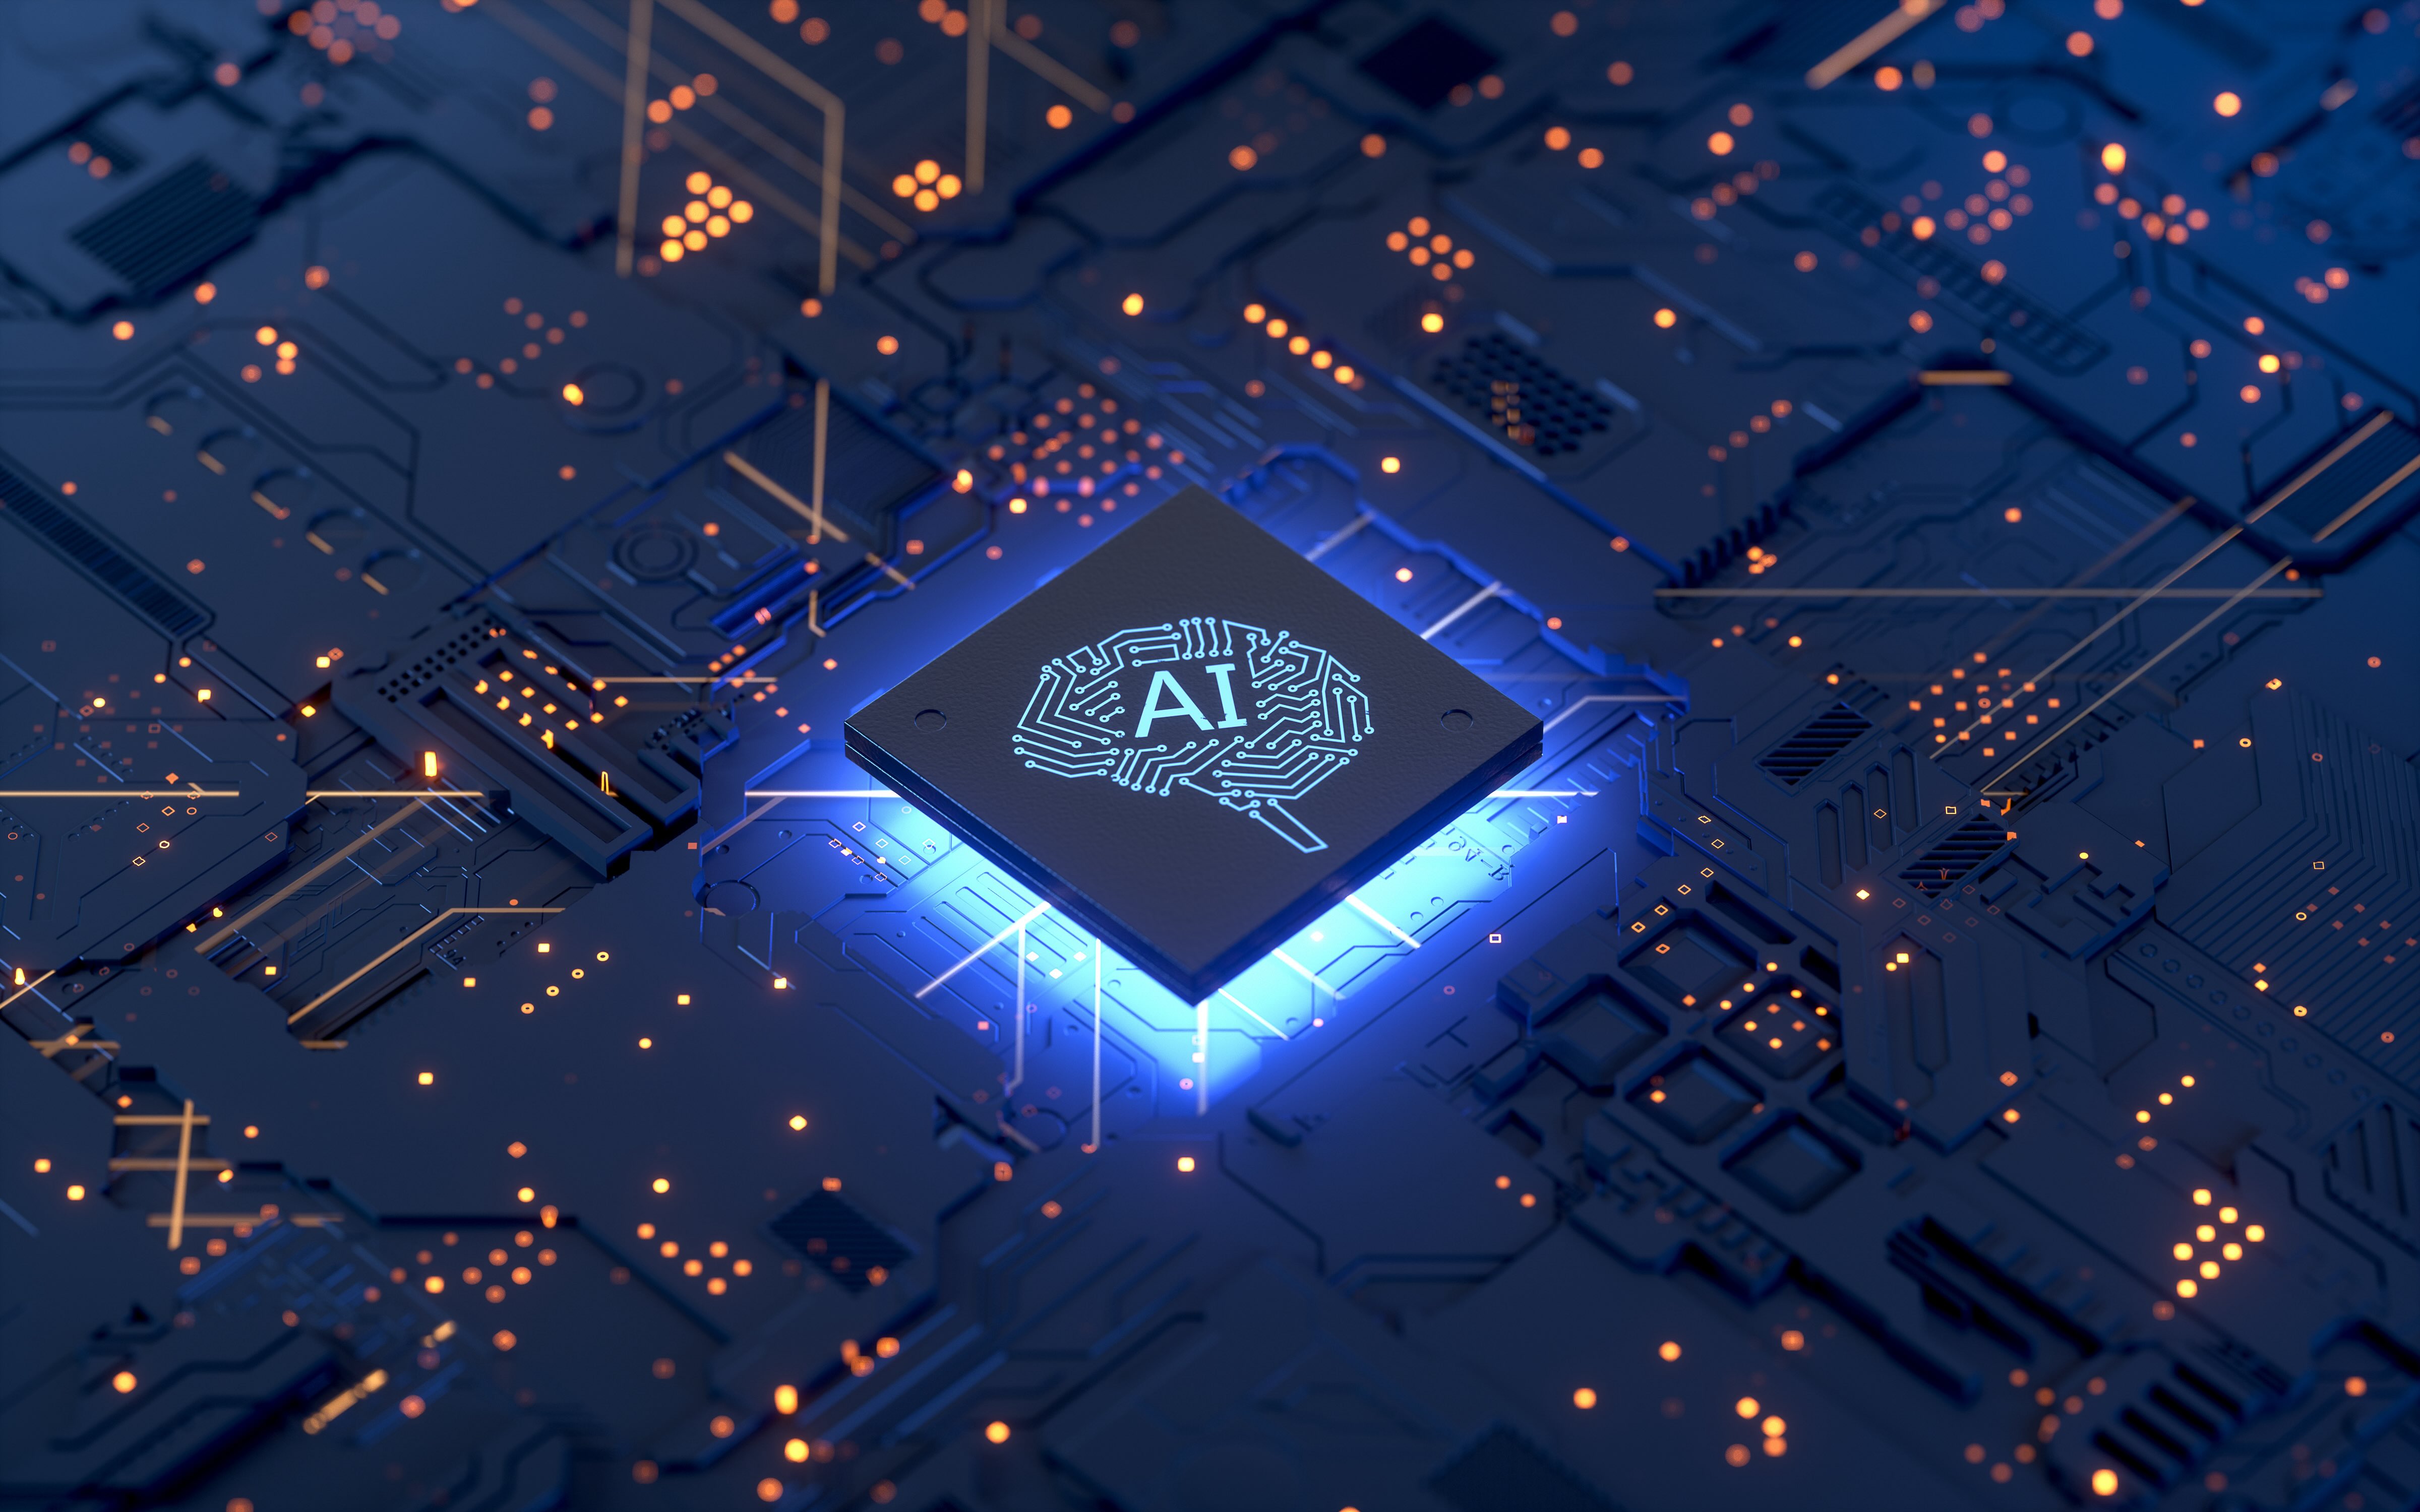 A close-up view of a glowing AI microchip embedded on a complex blue circuit board, with interconnected pathways and scattered orange lights symbolizing the integration of artificial intelligence in advanced technology systems.